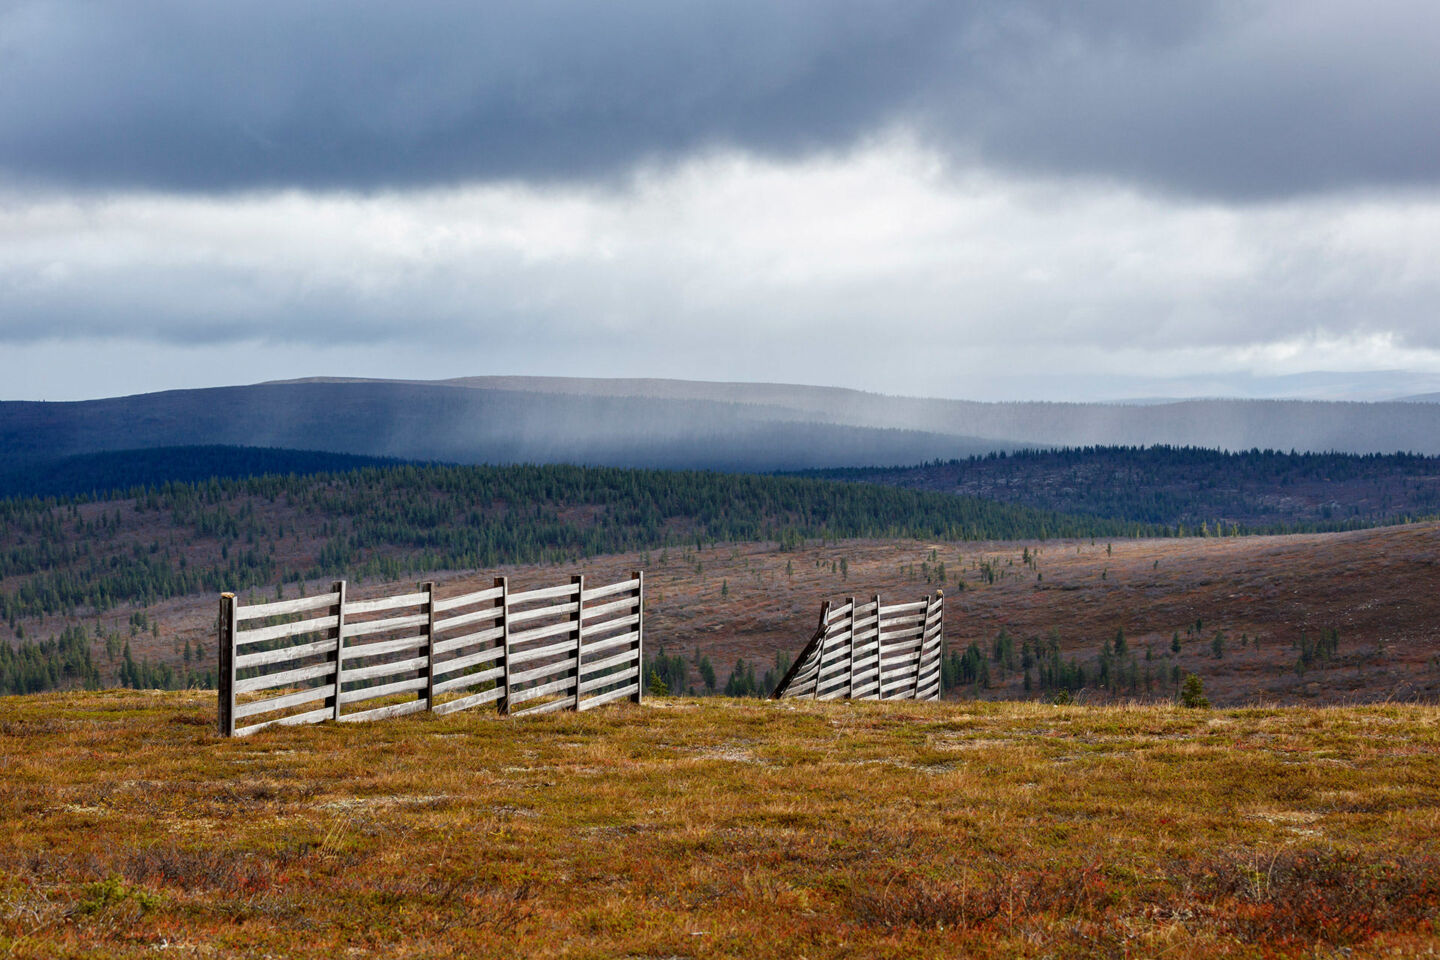 An autumn day on the fells in Inari, a Finnish Lapland filming location